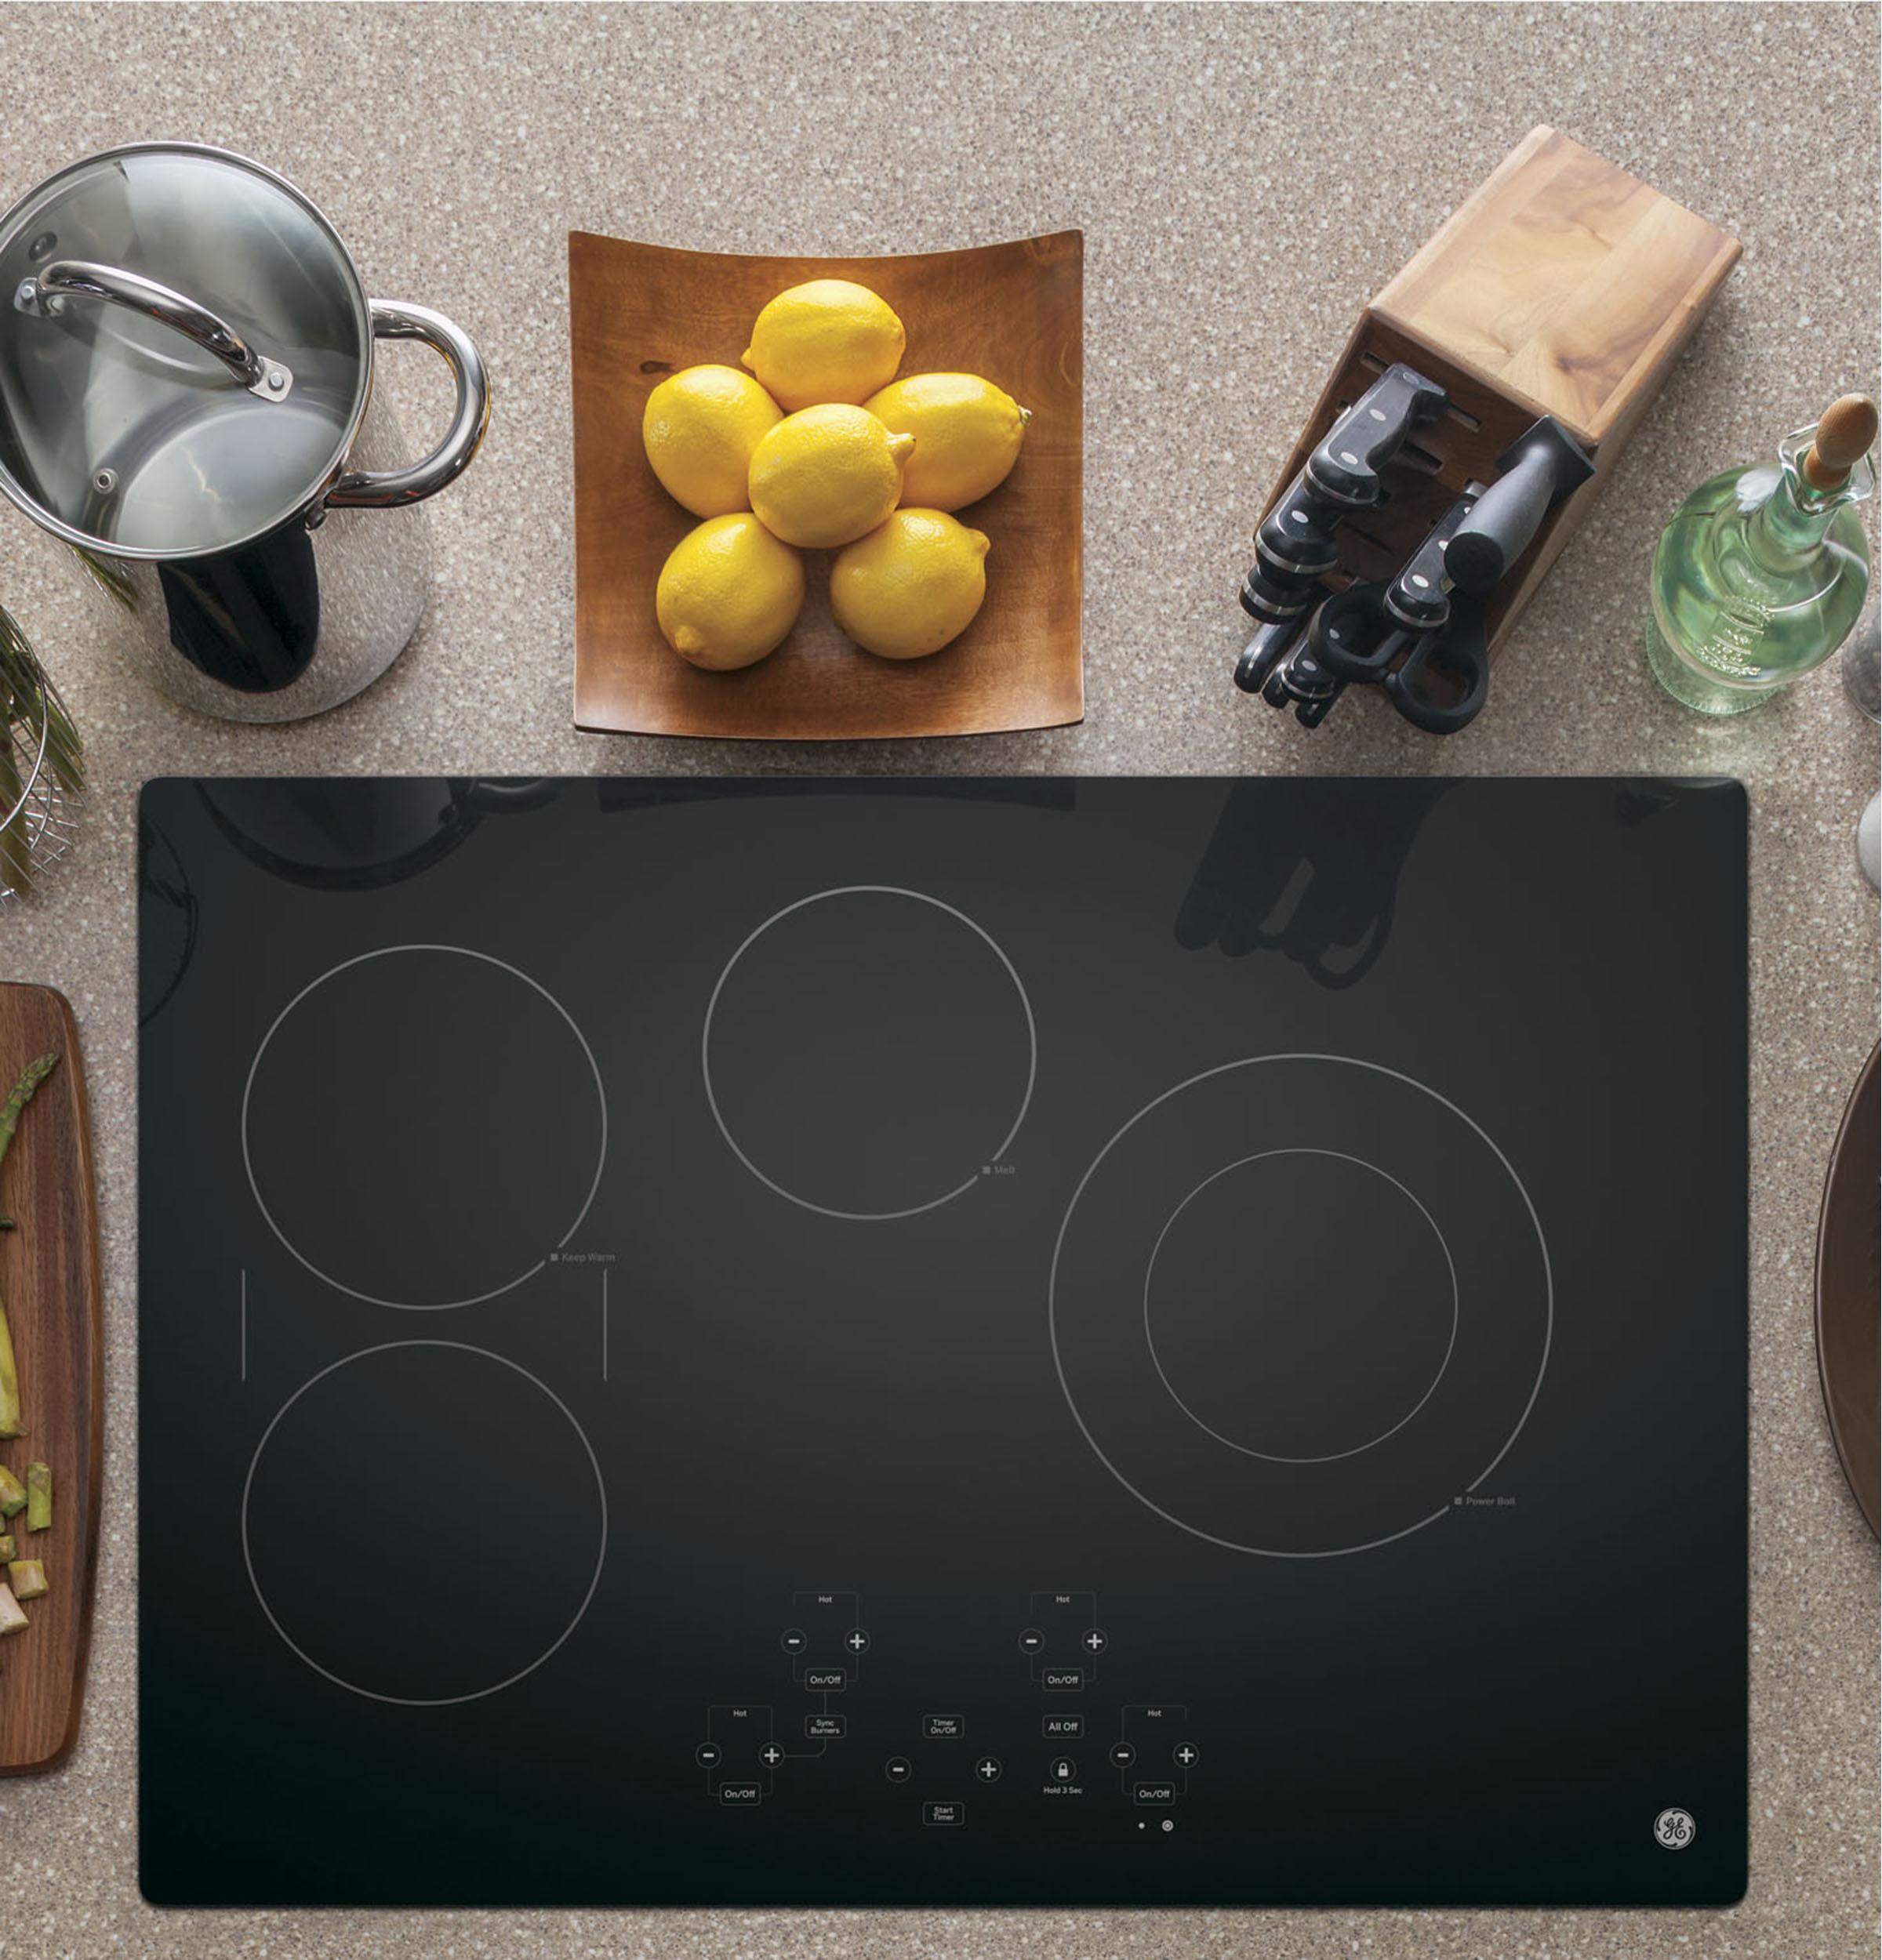 GE® 30" Built-In Touch Control Electric Cooktop